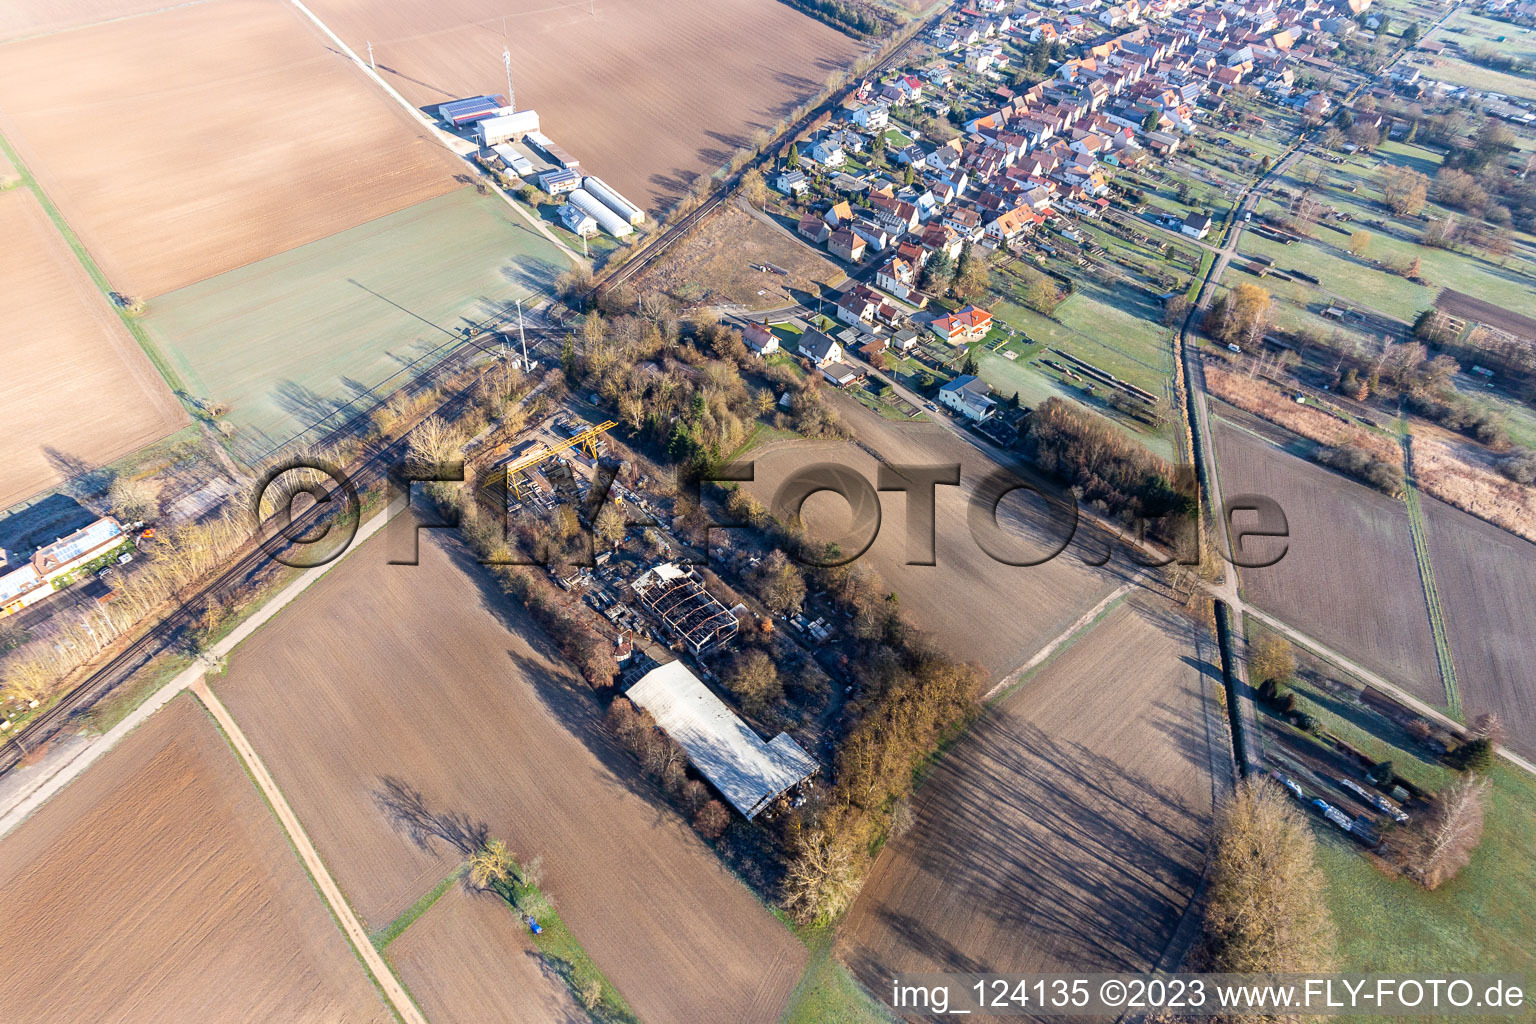 Aerial photograpy of Burned down hall in the district Schaidt in Wörth am Rhein in the state Rhineland-Palatinate, Germany